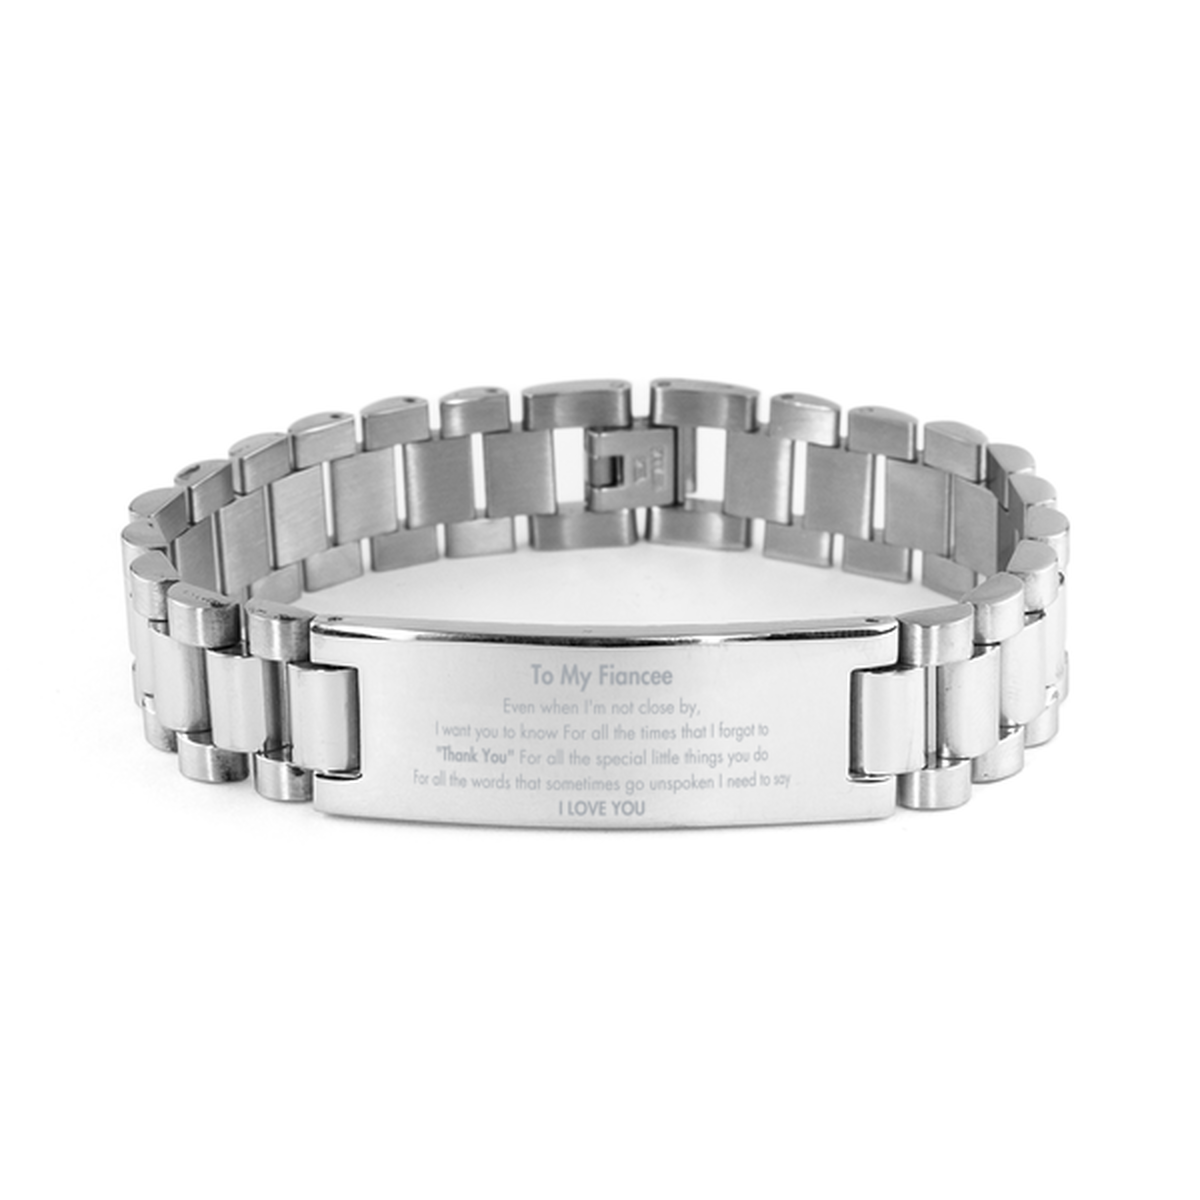 Thank You Gifts for Fiancee, Keepsake Ladder Stainless Steel Bracelet Gifts for Fiancee Birthday Mother's day Father's Day Fiancee For all the words That sometimes go unspoken I need to say I LOVE YOU